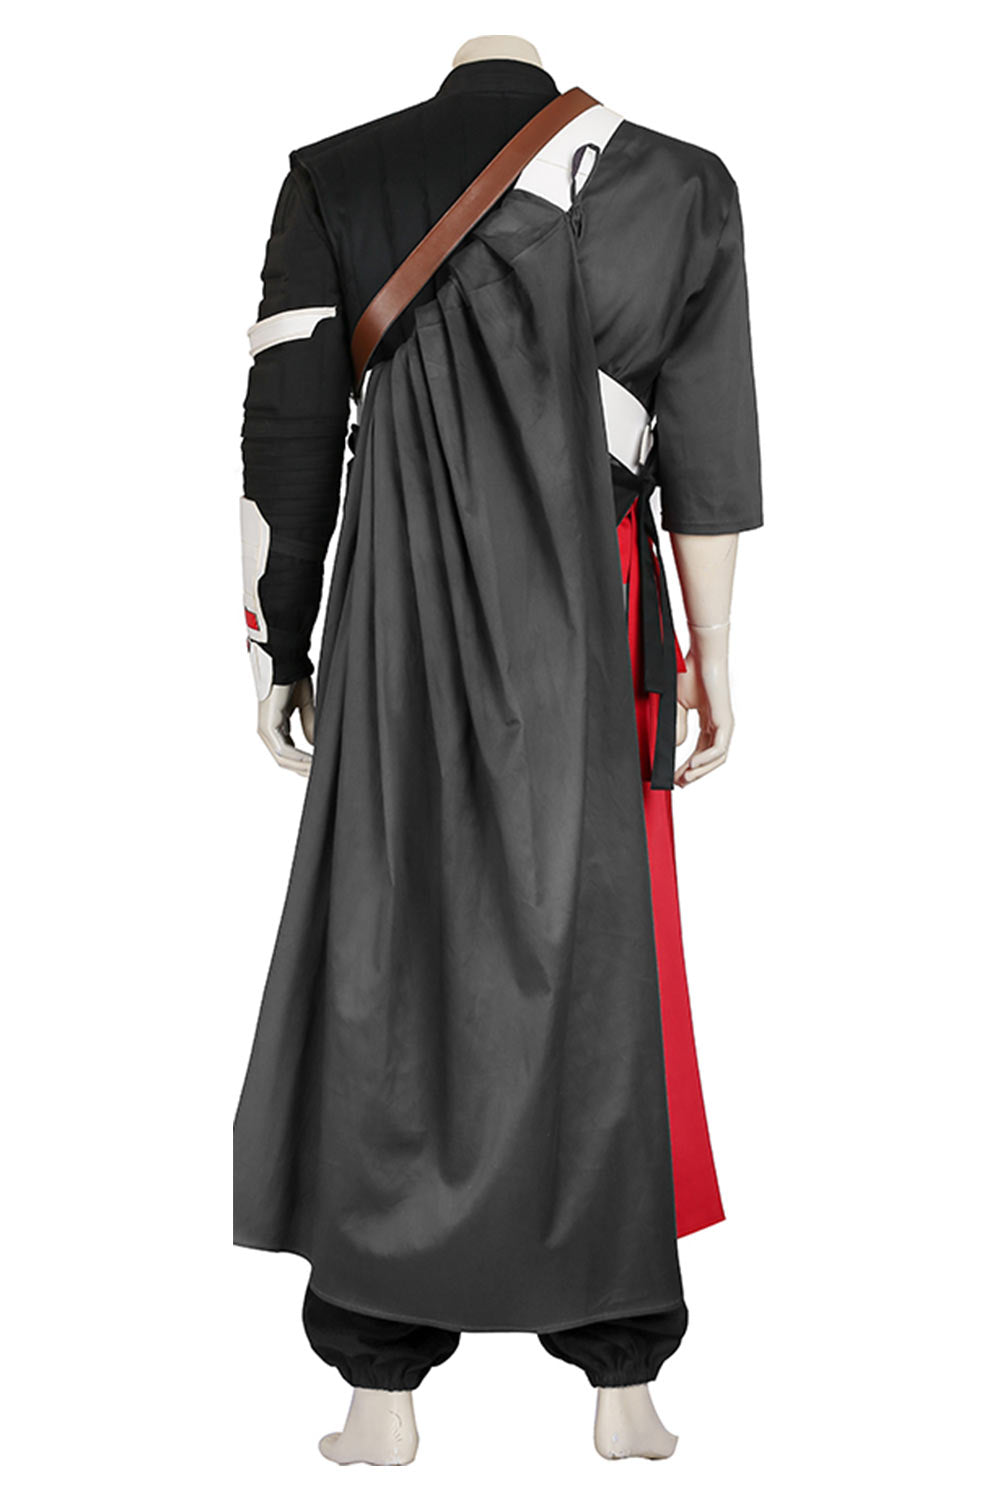 SeeCosplay Rogue One: A Story Chirrut ?mwe Outfit Costume SWCostume